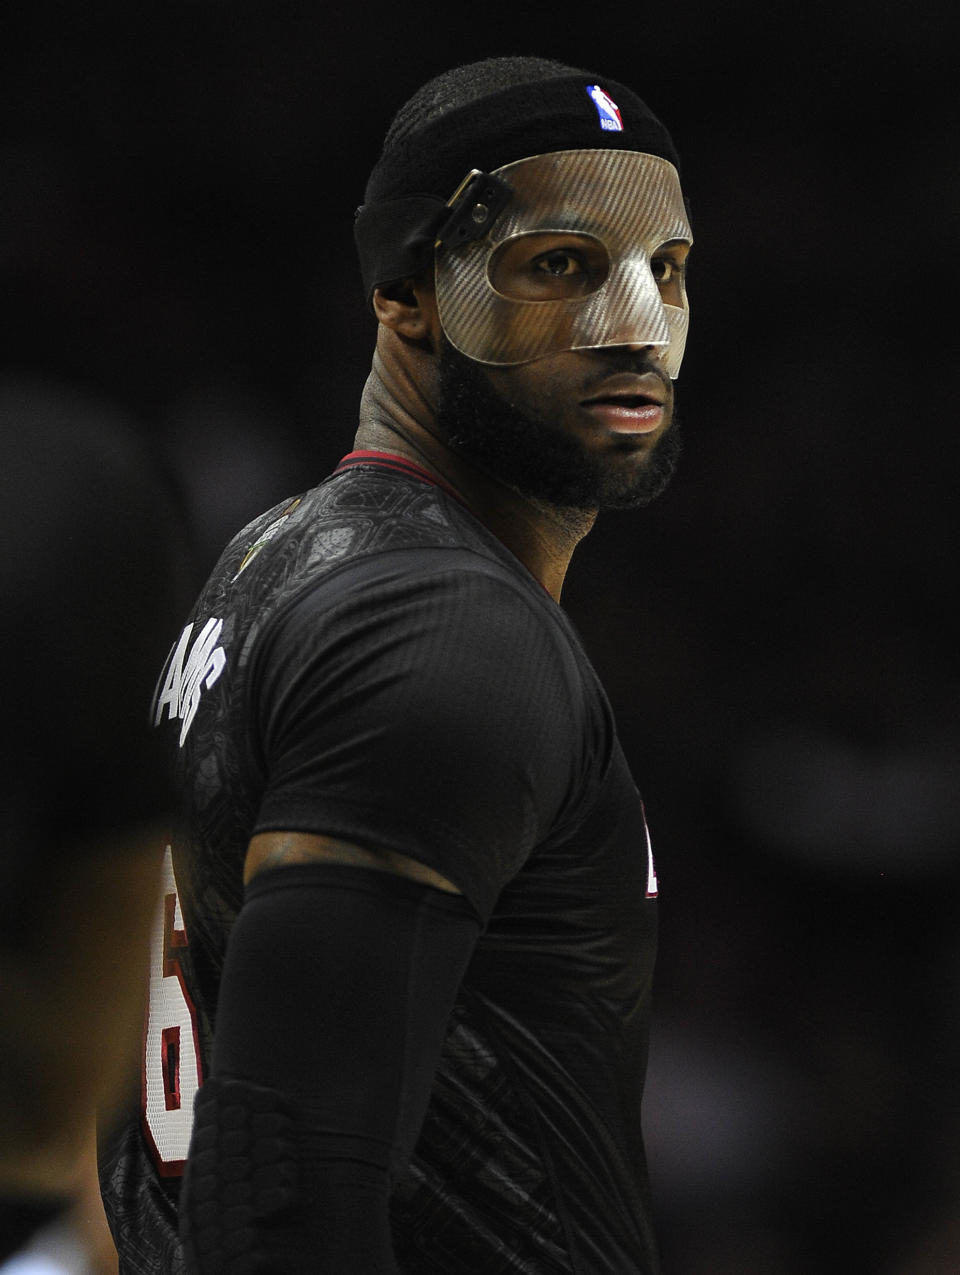 Miami Heat forward LeBron James walks on the court during the first half of an NBA basketball game against the San Antonio Spurs, Thursday, March 6, 2014, in San Antonio. (AP Photo/Darren Abate)